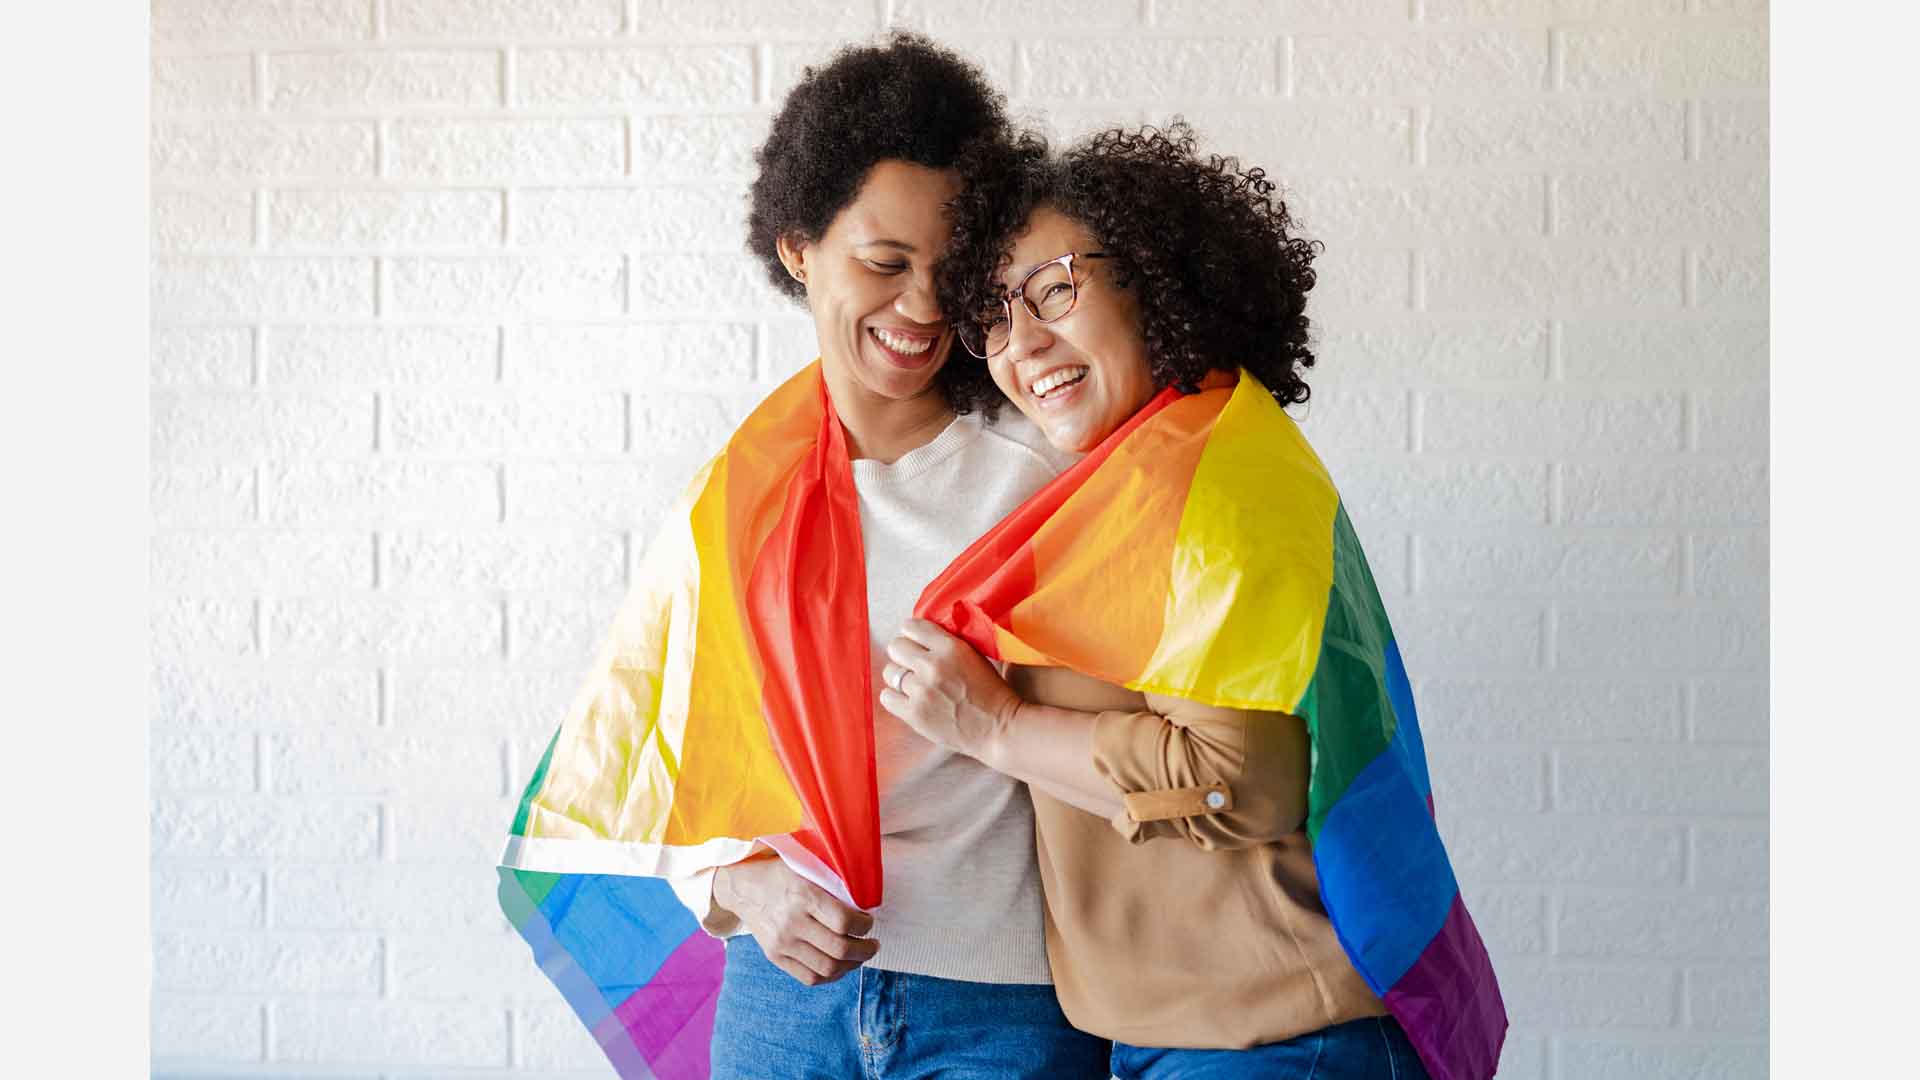 Social Security’s commitment to the LGBTQ+ community